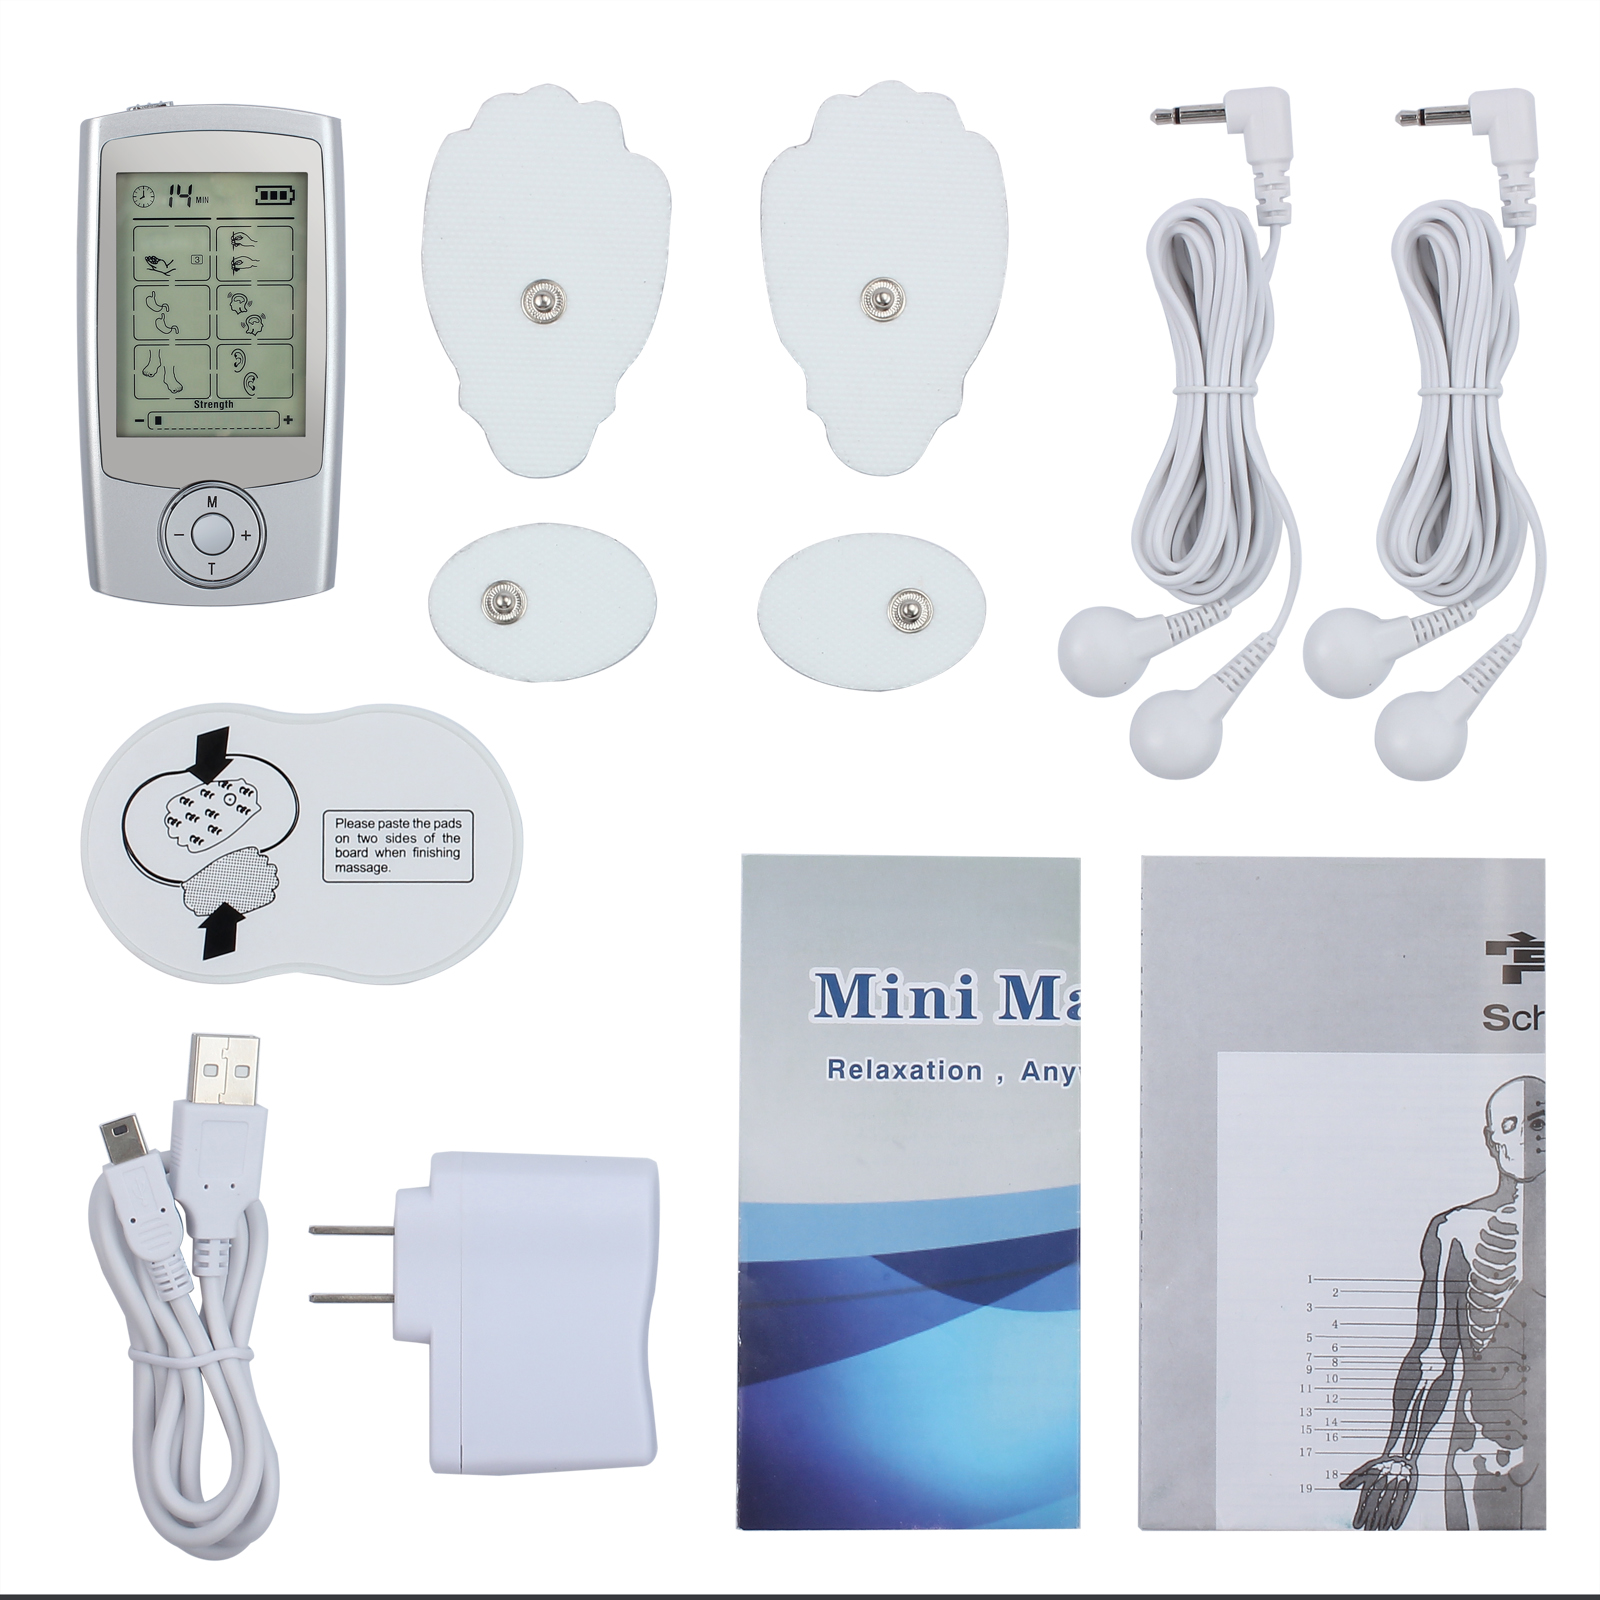 2x pad 2x Small pad 1x Pad storage board 1x Electrode wires 1x USB cable 1x AC adapter 1x Instruction manual 1x Acupuncture placement point chart